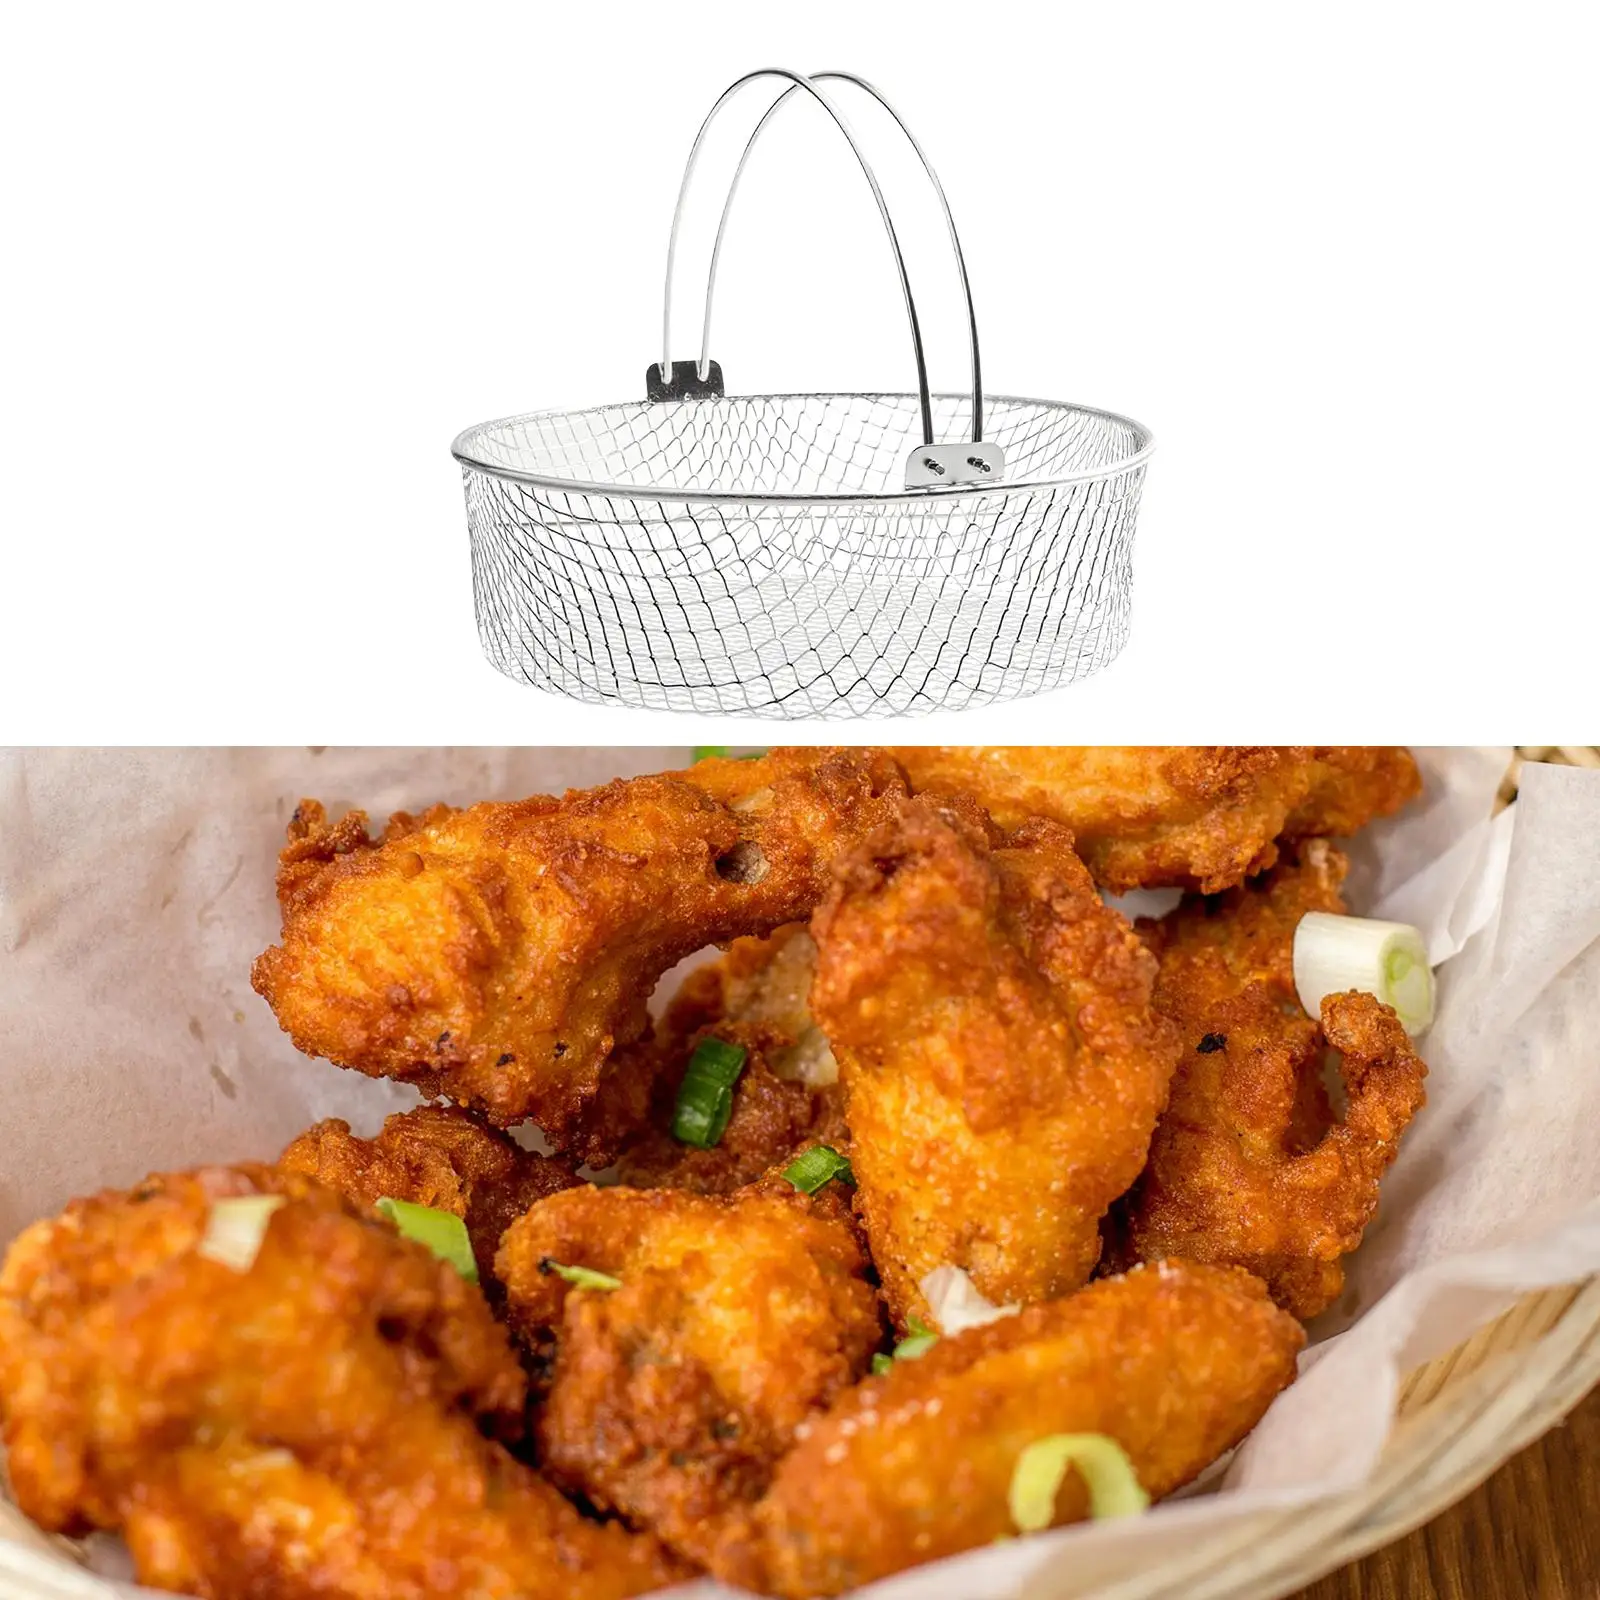 304 Stainless Steel Air Fryer Basket with Handle Food Container Strainer for Kitchen Home